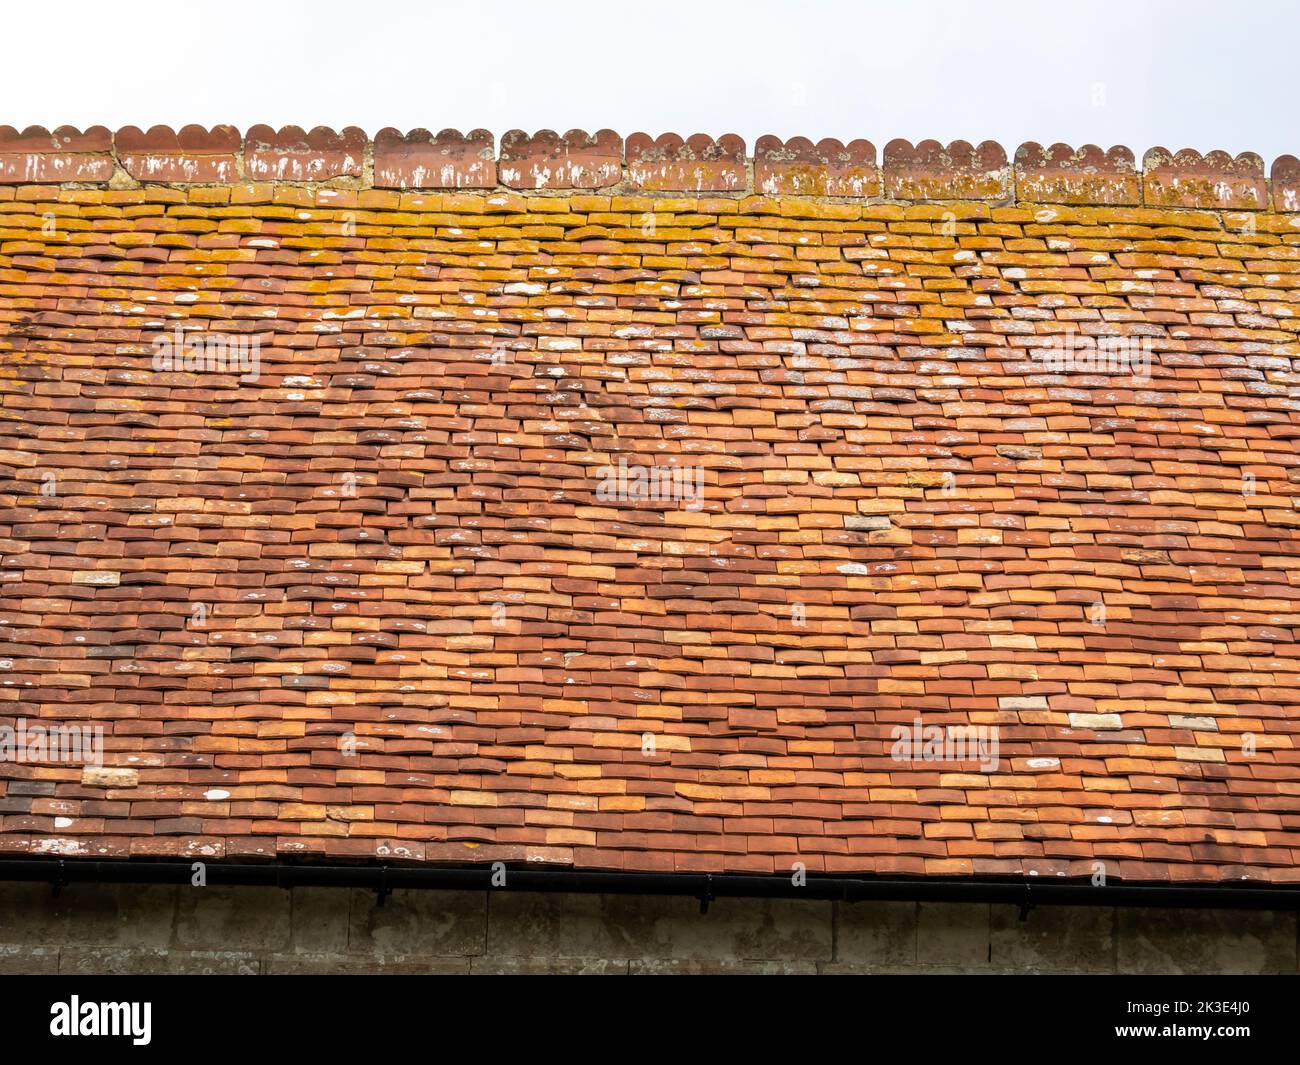 Lichen covered clay tiles on a house roof in Freshwater on the Isle of White, UK. Stock Photo